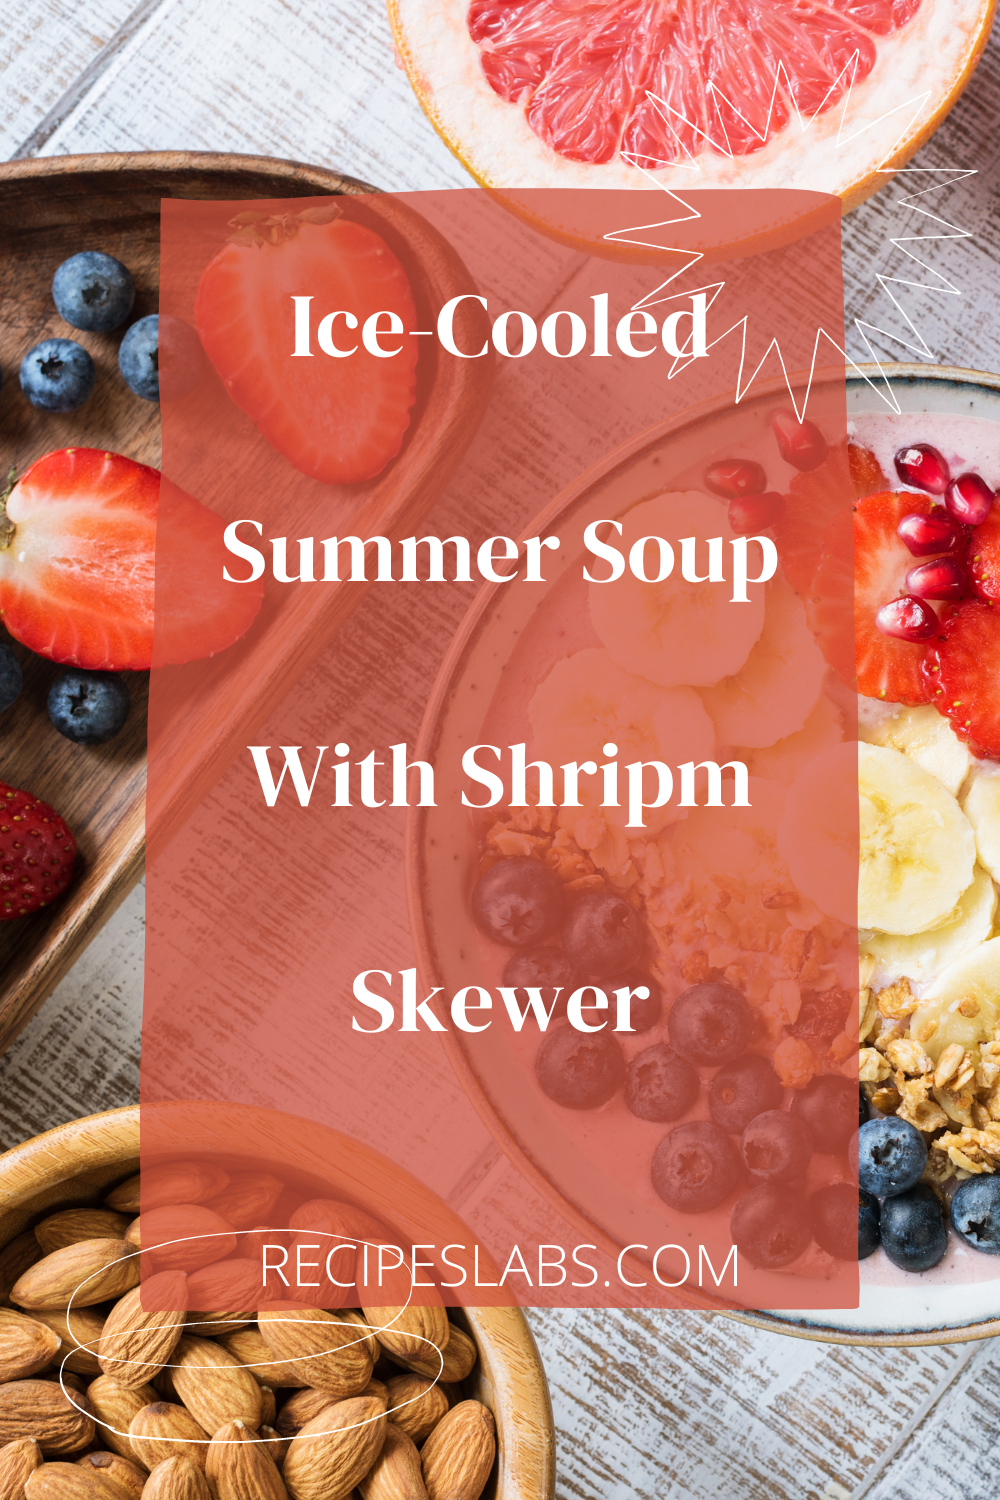 Ice-Cooled Summer Soup With Shripm Skewer